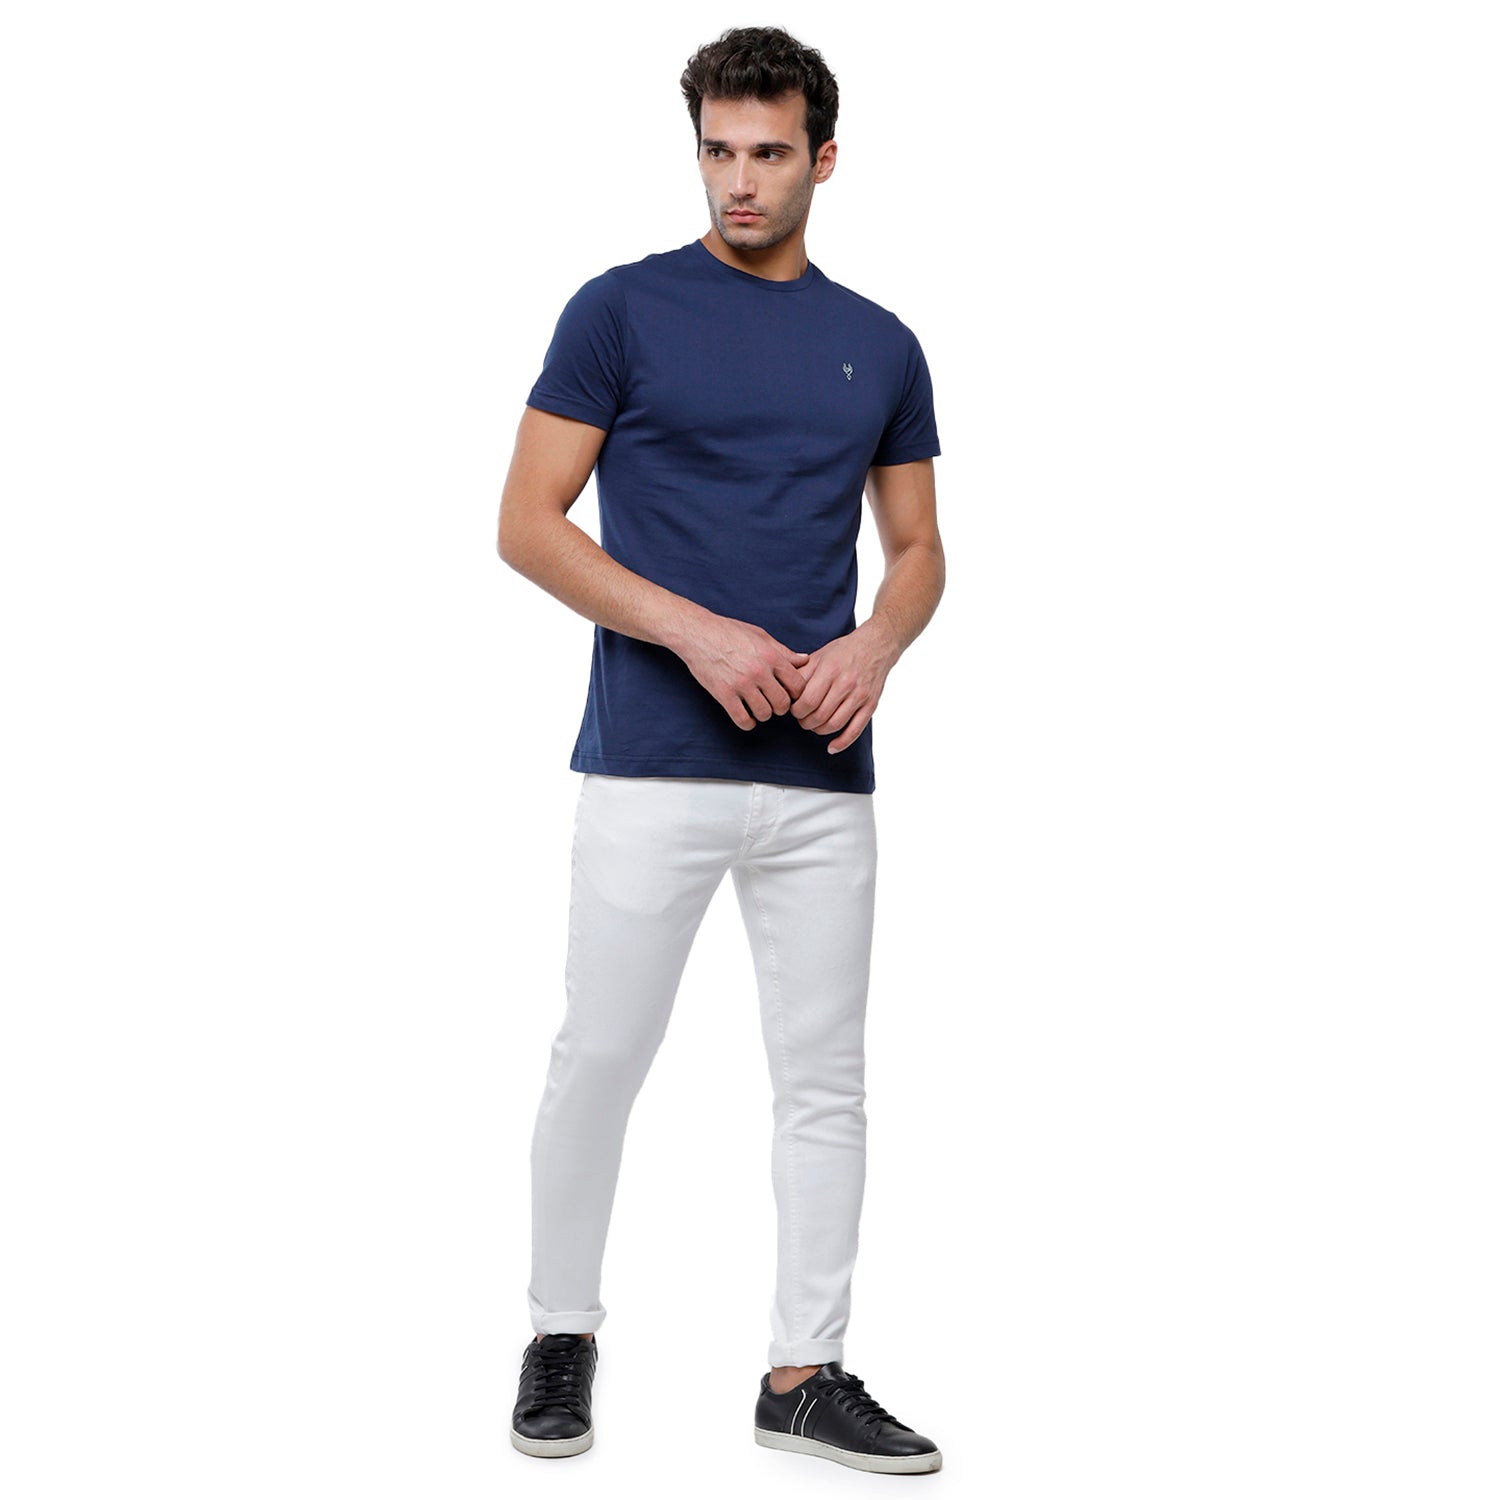 Classic Polo Men's Solid Single Jersey Navy Half Sleeve Slim Fit T-Shirt - Kore-08 T-shirt Classic Polo 